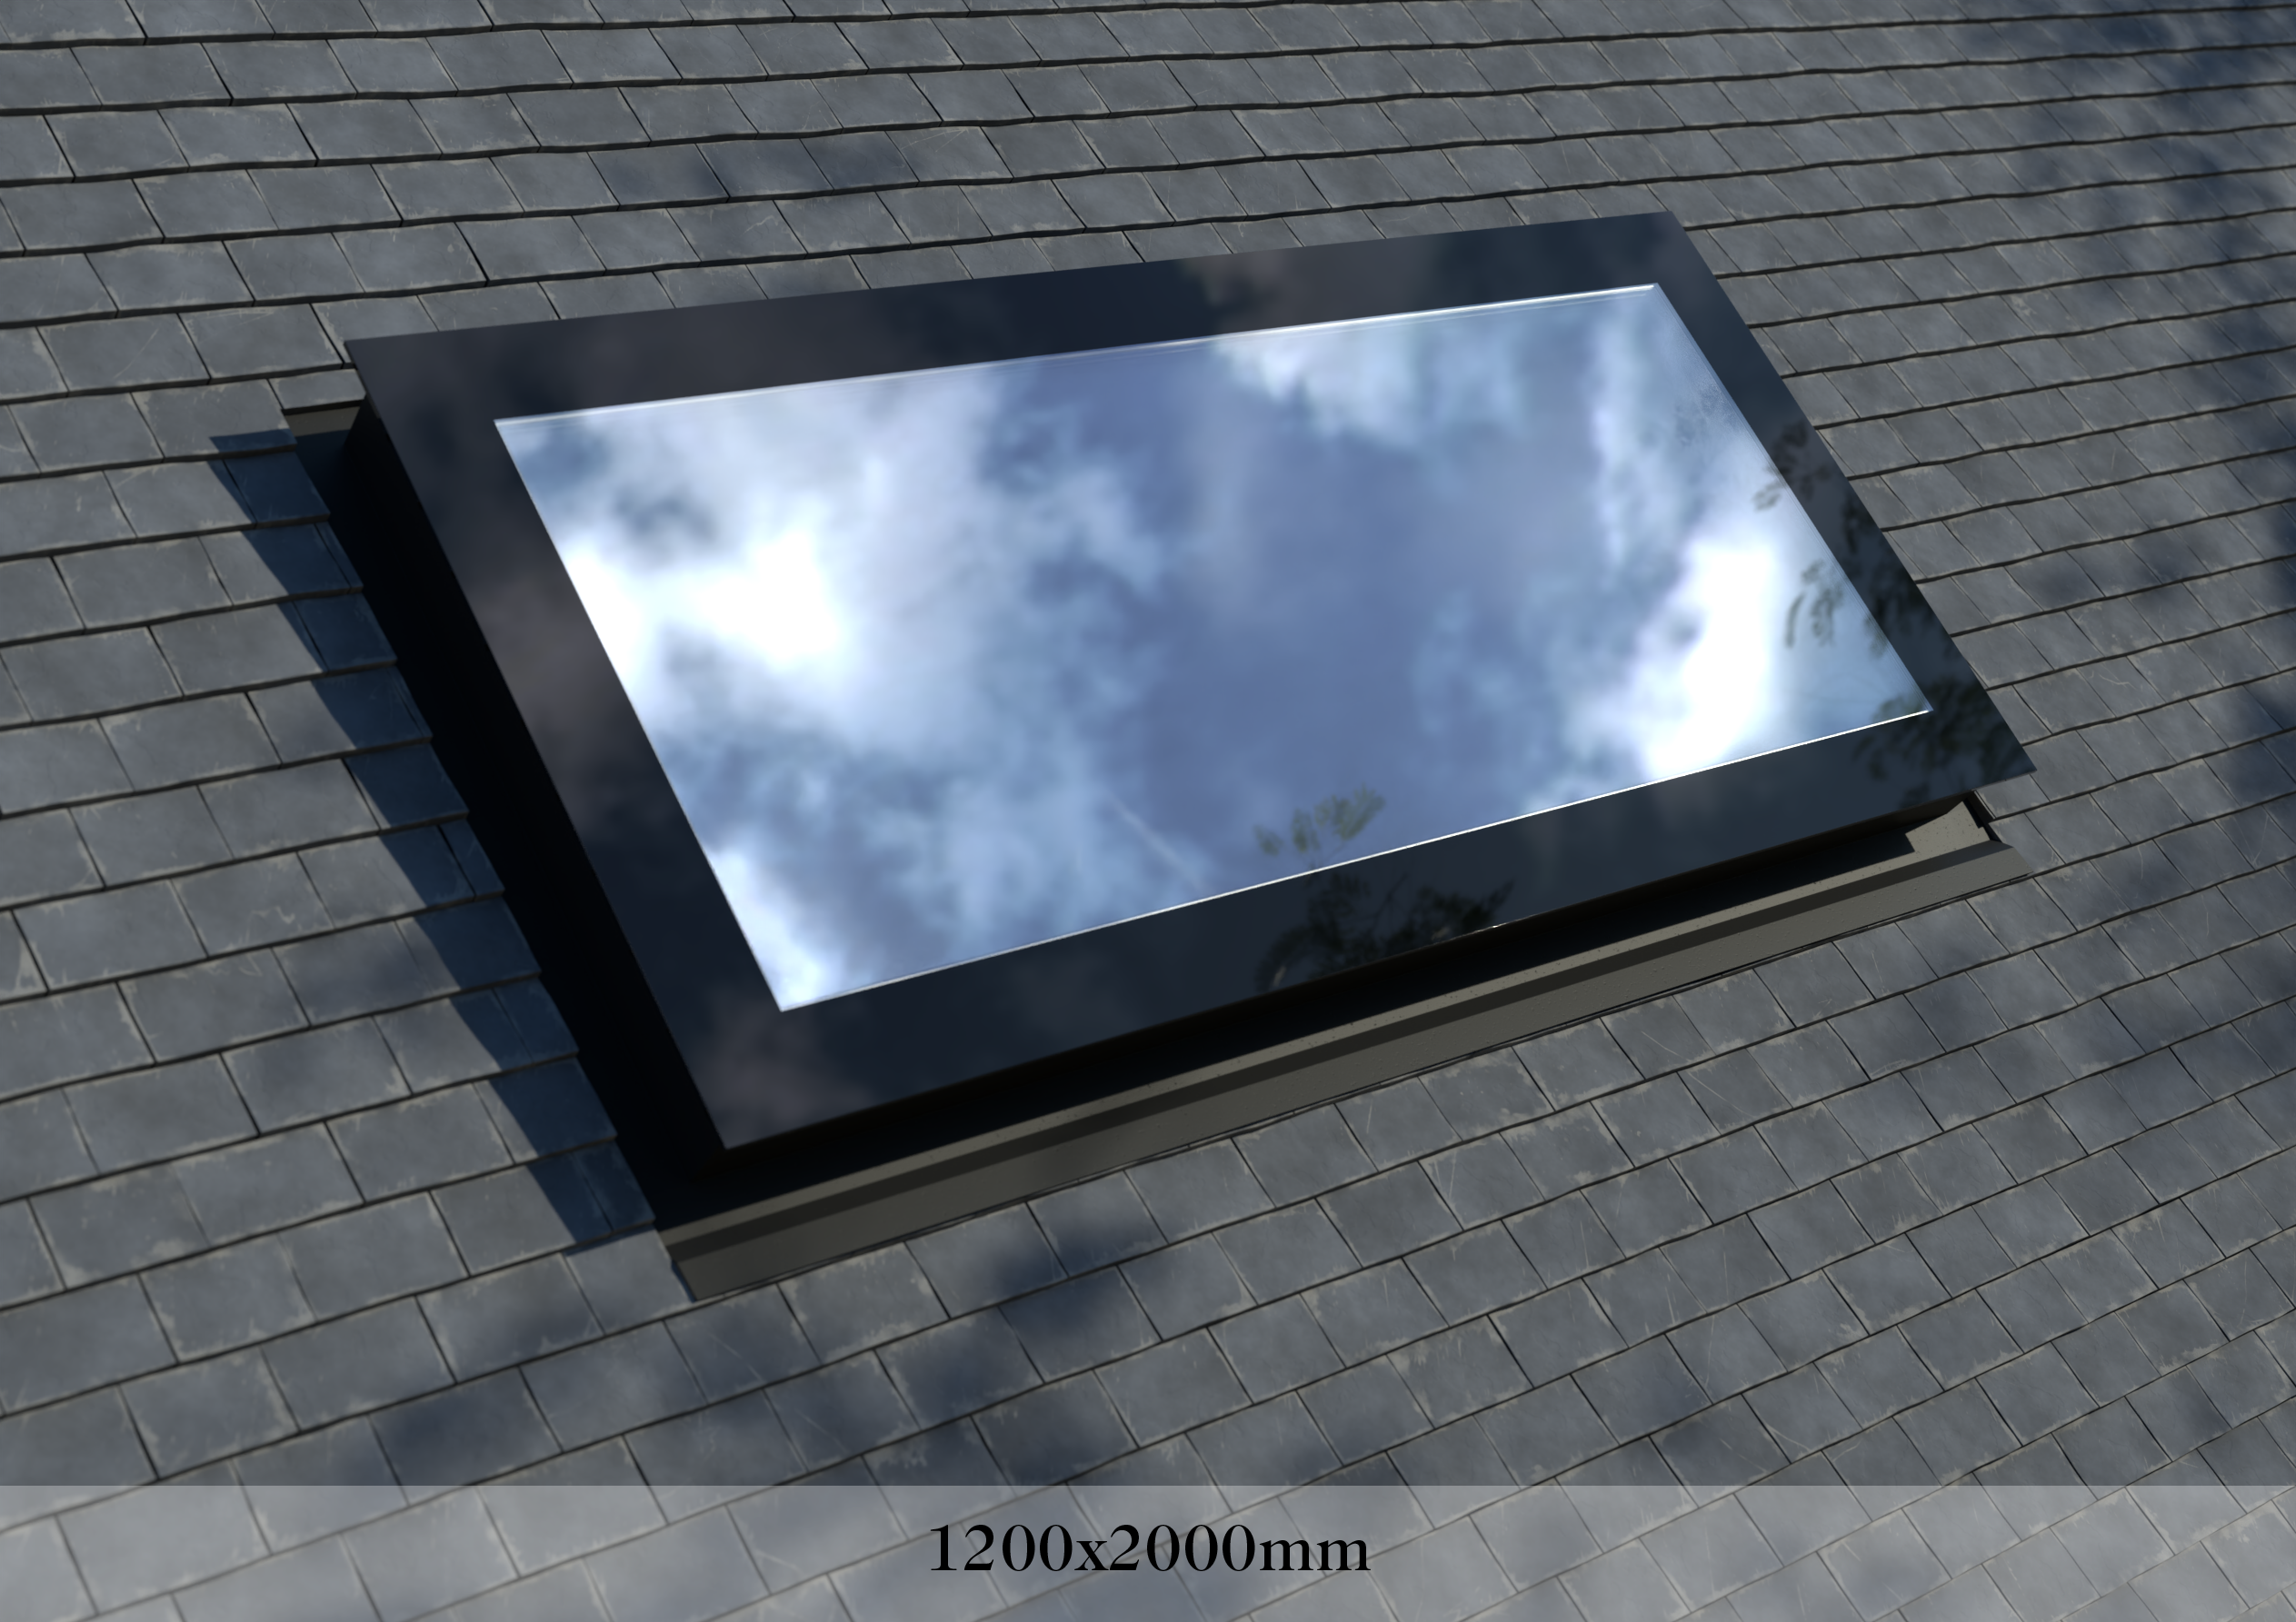 Pitched Roof Skylight 1200 x 2000mm